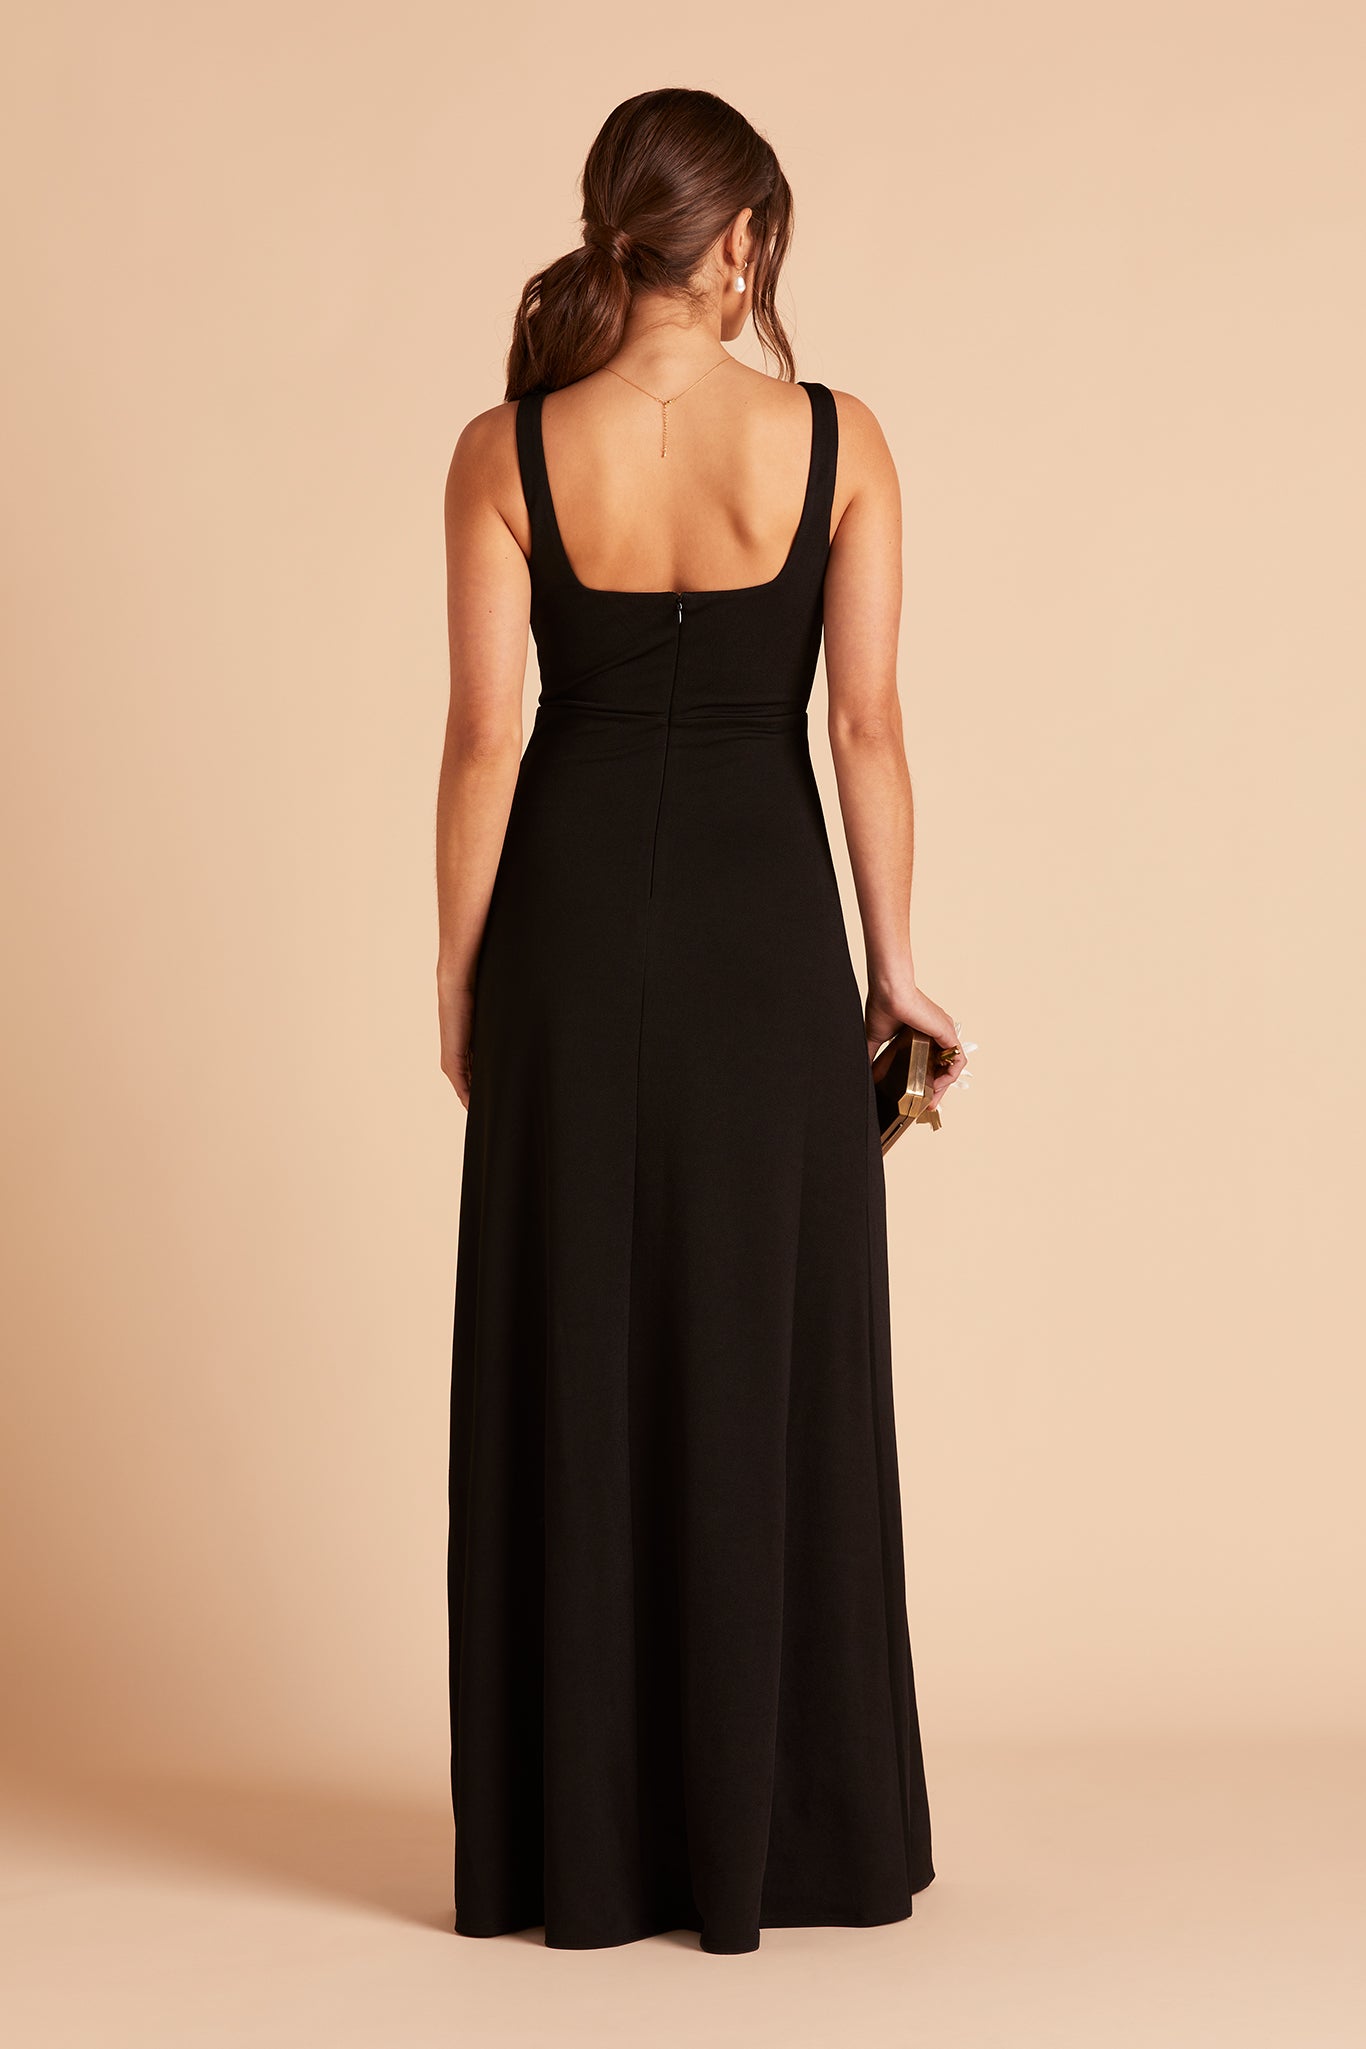 Back view of the Alex Convertible Bridesmaid Dress in black crepe shows that the shoulder ties feature a square cut that falls just below the shoulder blades.